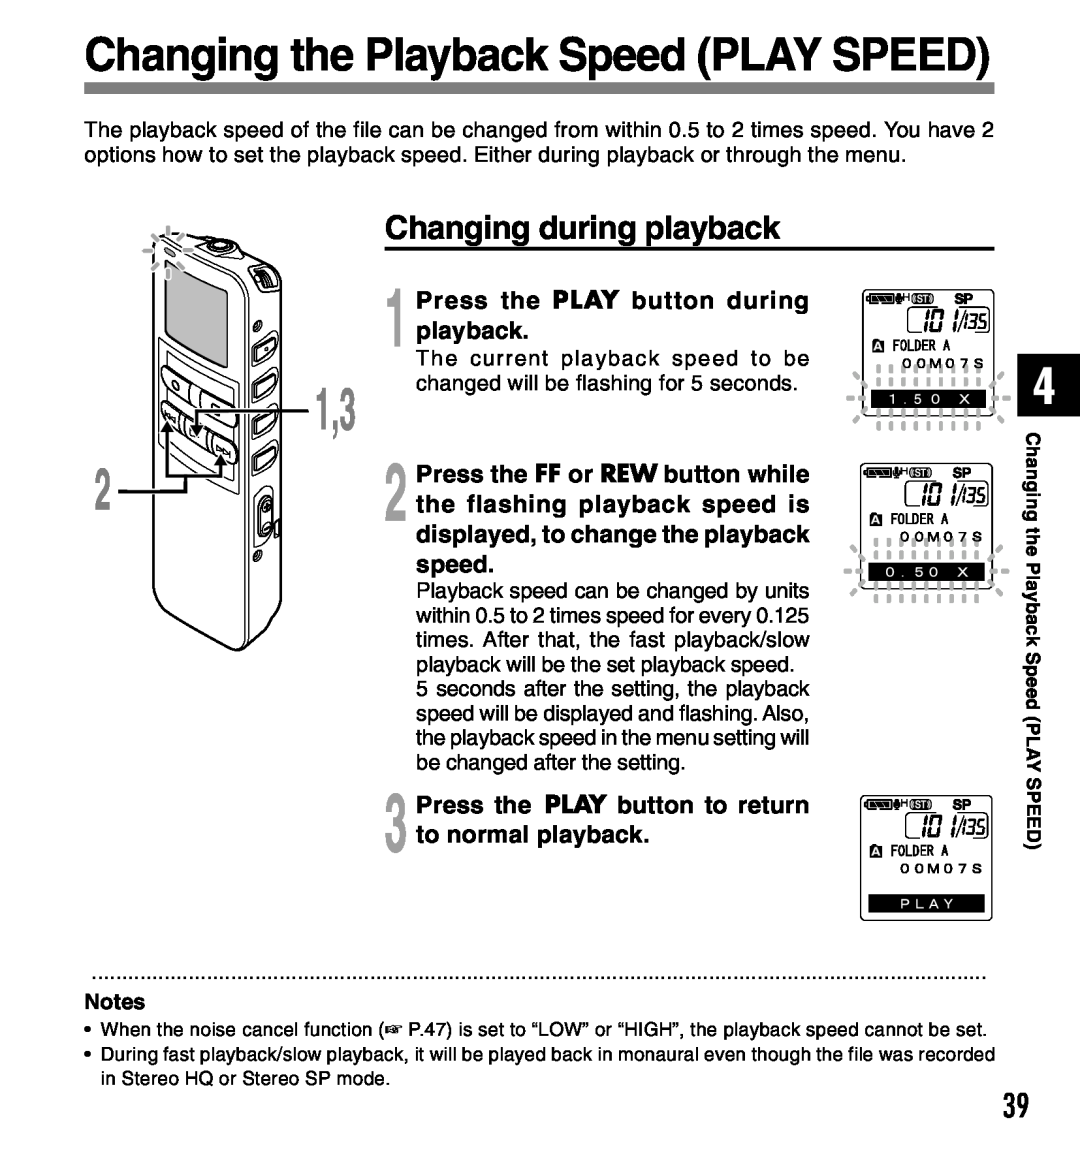 Olympus 2 manual Changing the Playback Speed PLAY SPEED, Changing during playback, Press the PLAY button during playback 